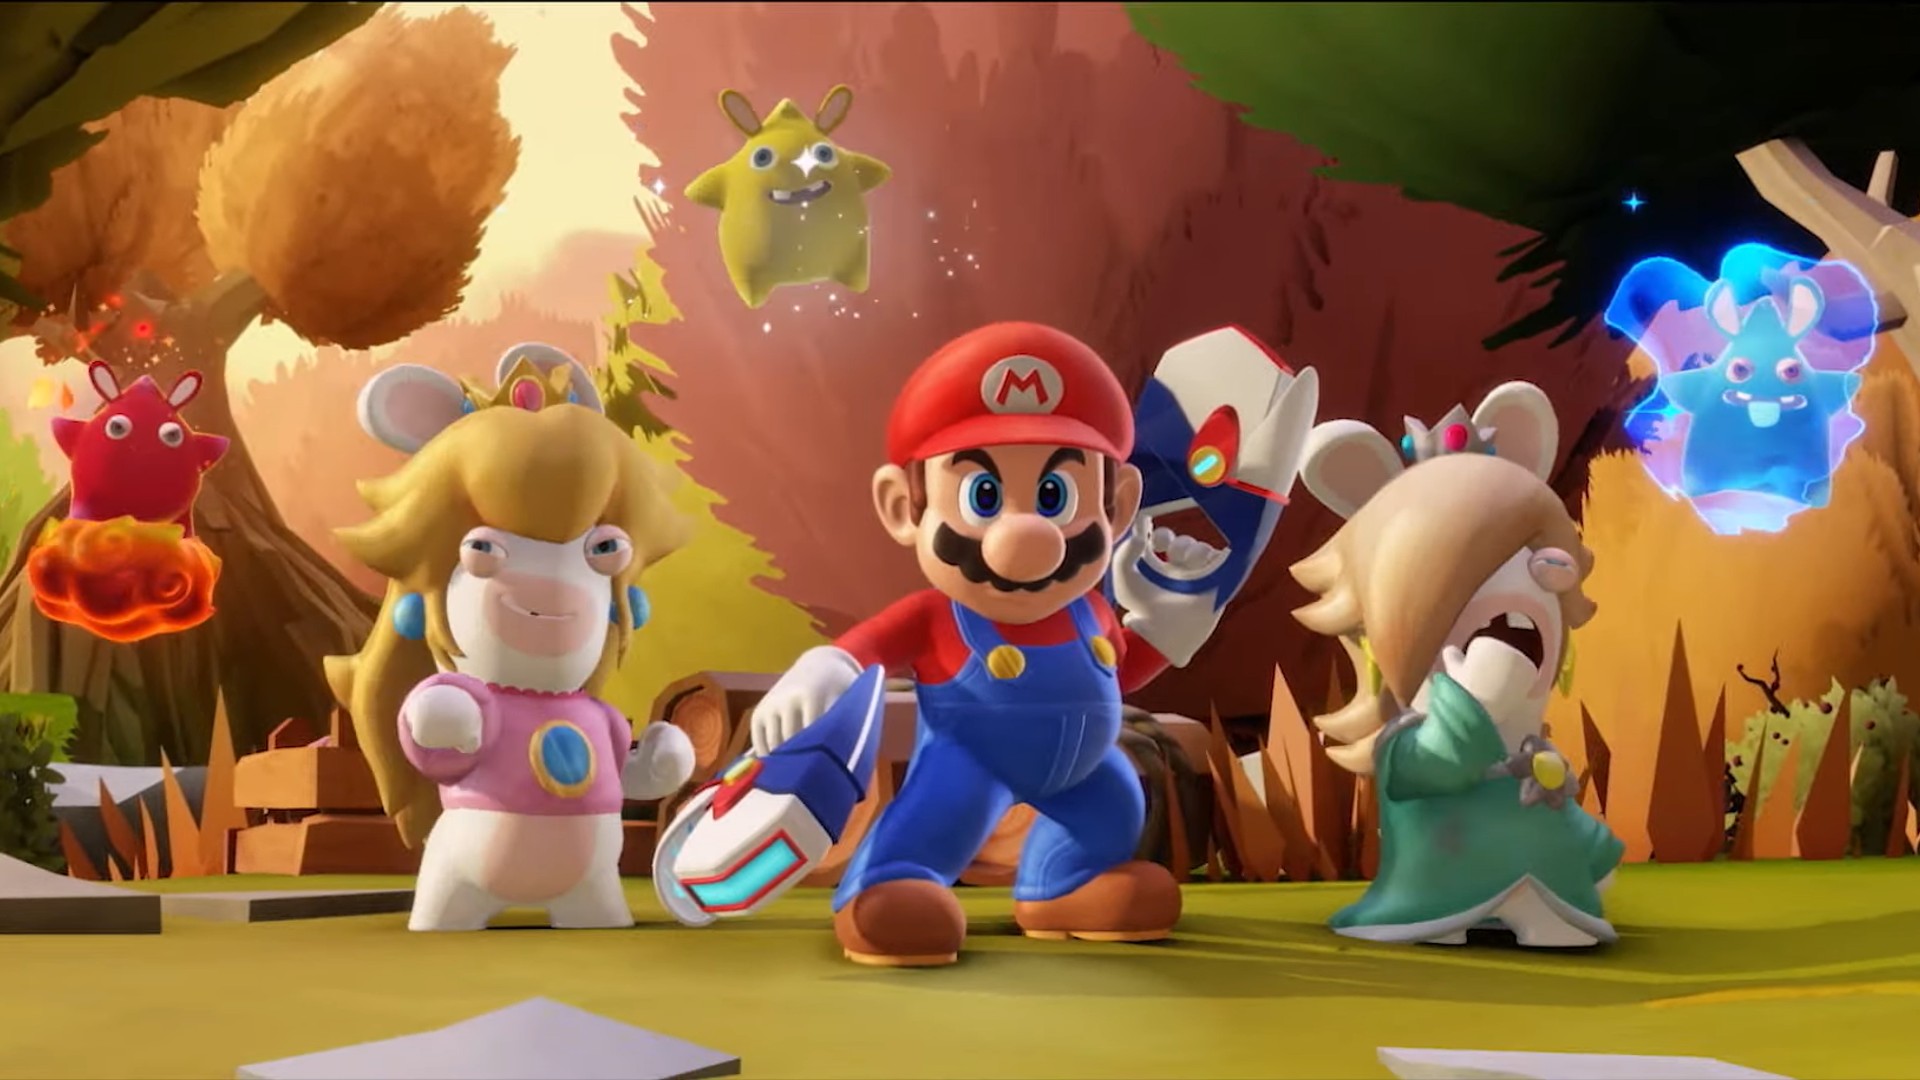 New Mario + Rabbids: Sparks of Hope trailer shows off turn-based